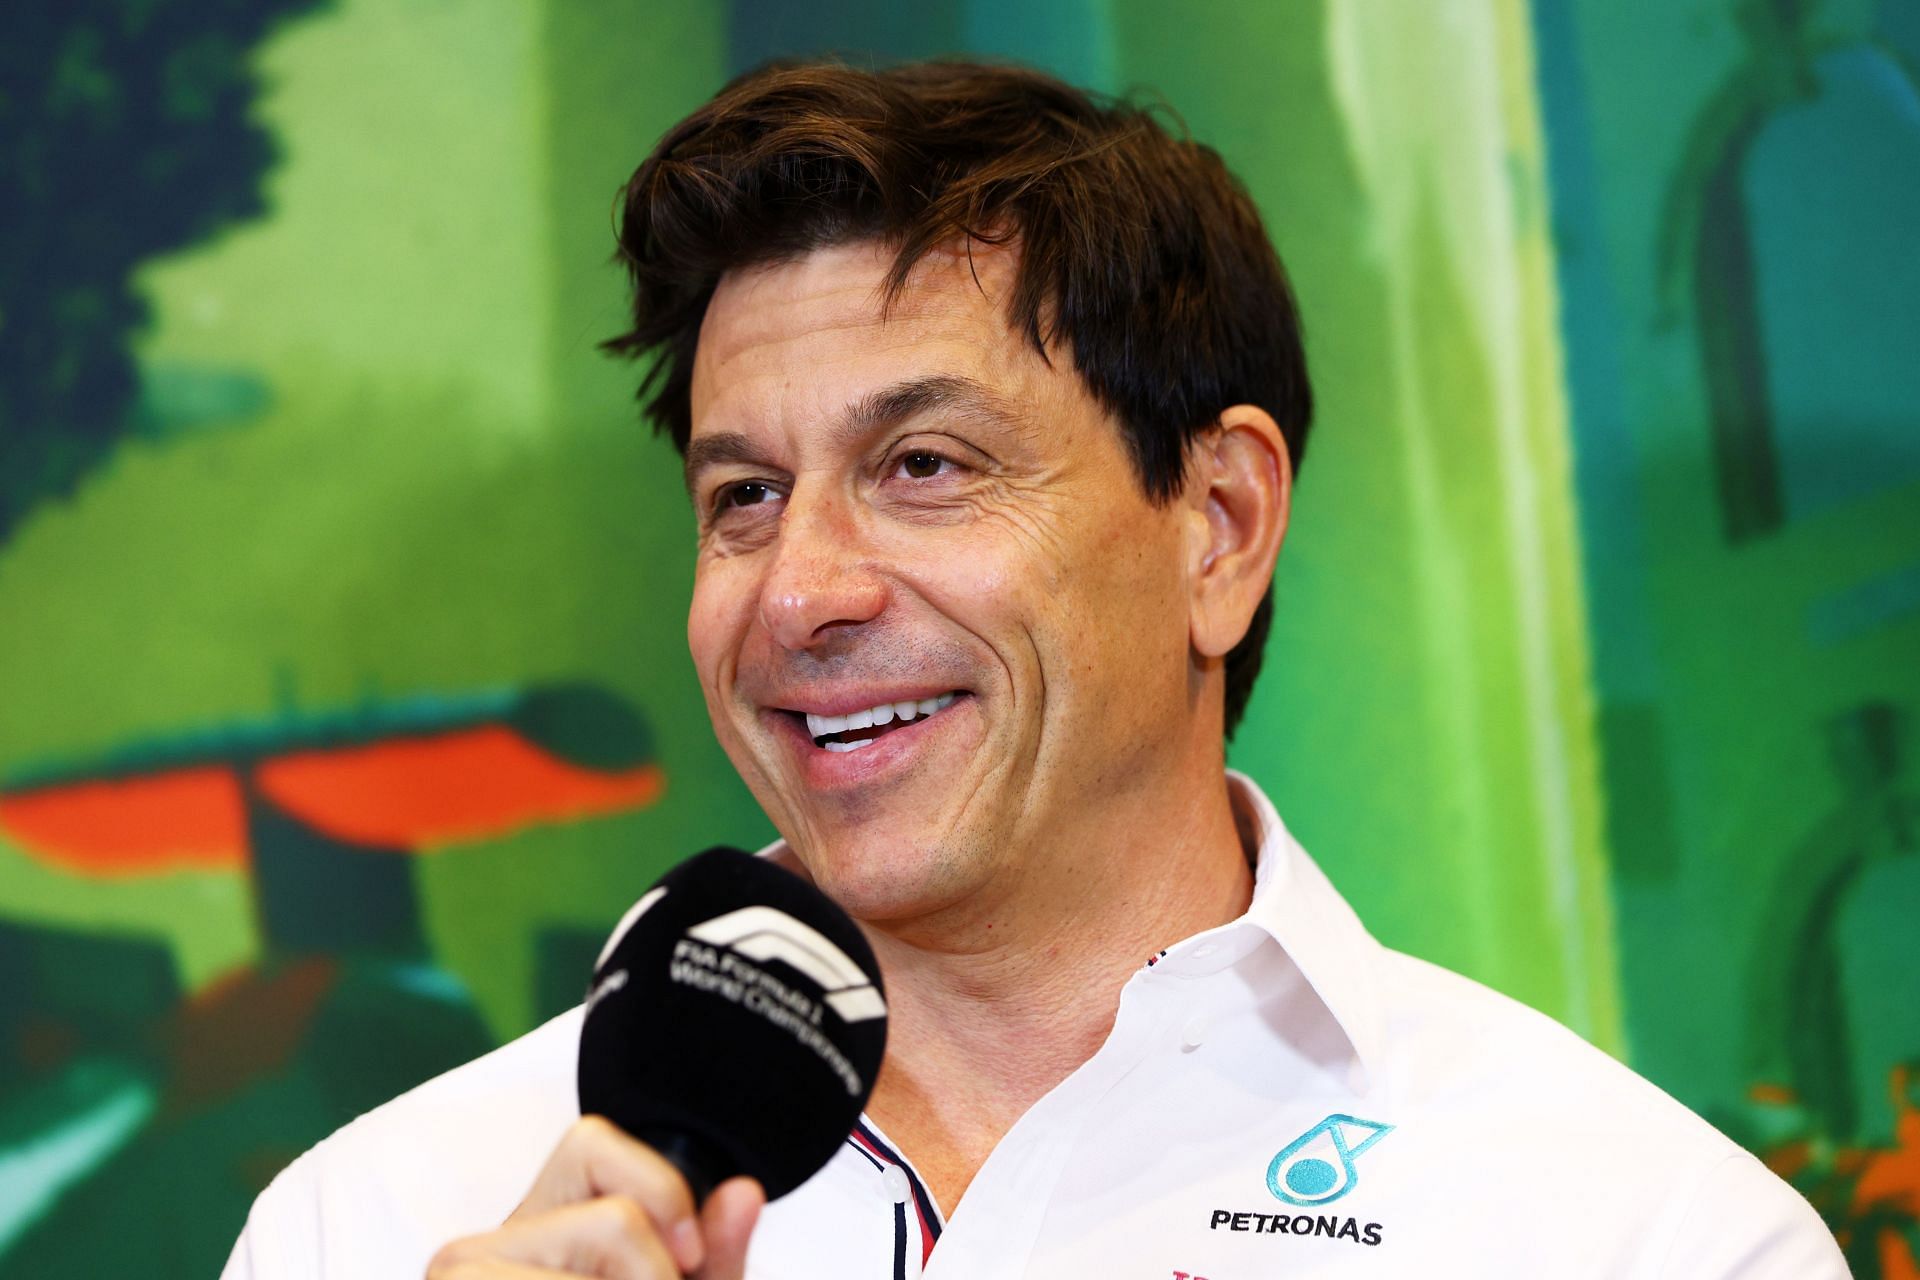 Mercedes team principal Toto Wolff speaks to the media during the 2022 F1 Azerbaijan GP weekend (Photo by Clive Rose/Getty Images)